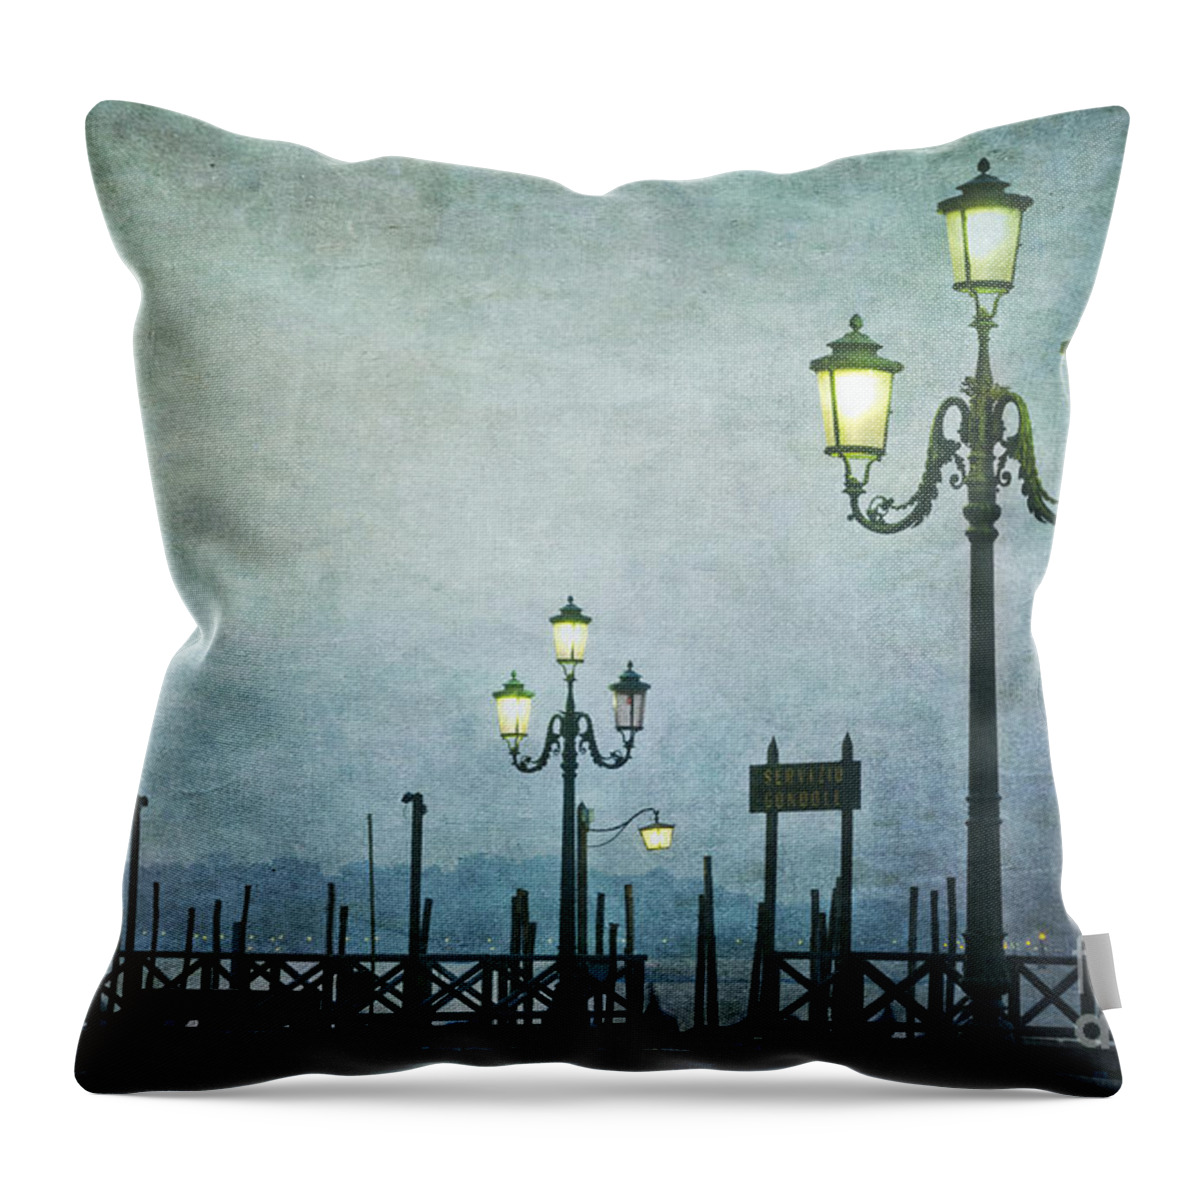 Venice Throw Pillow featuring the Servizio Gondole by Marion Galt